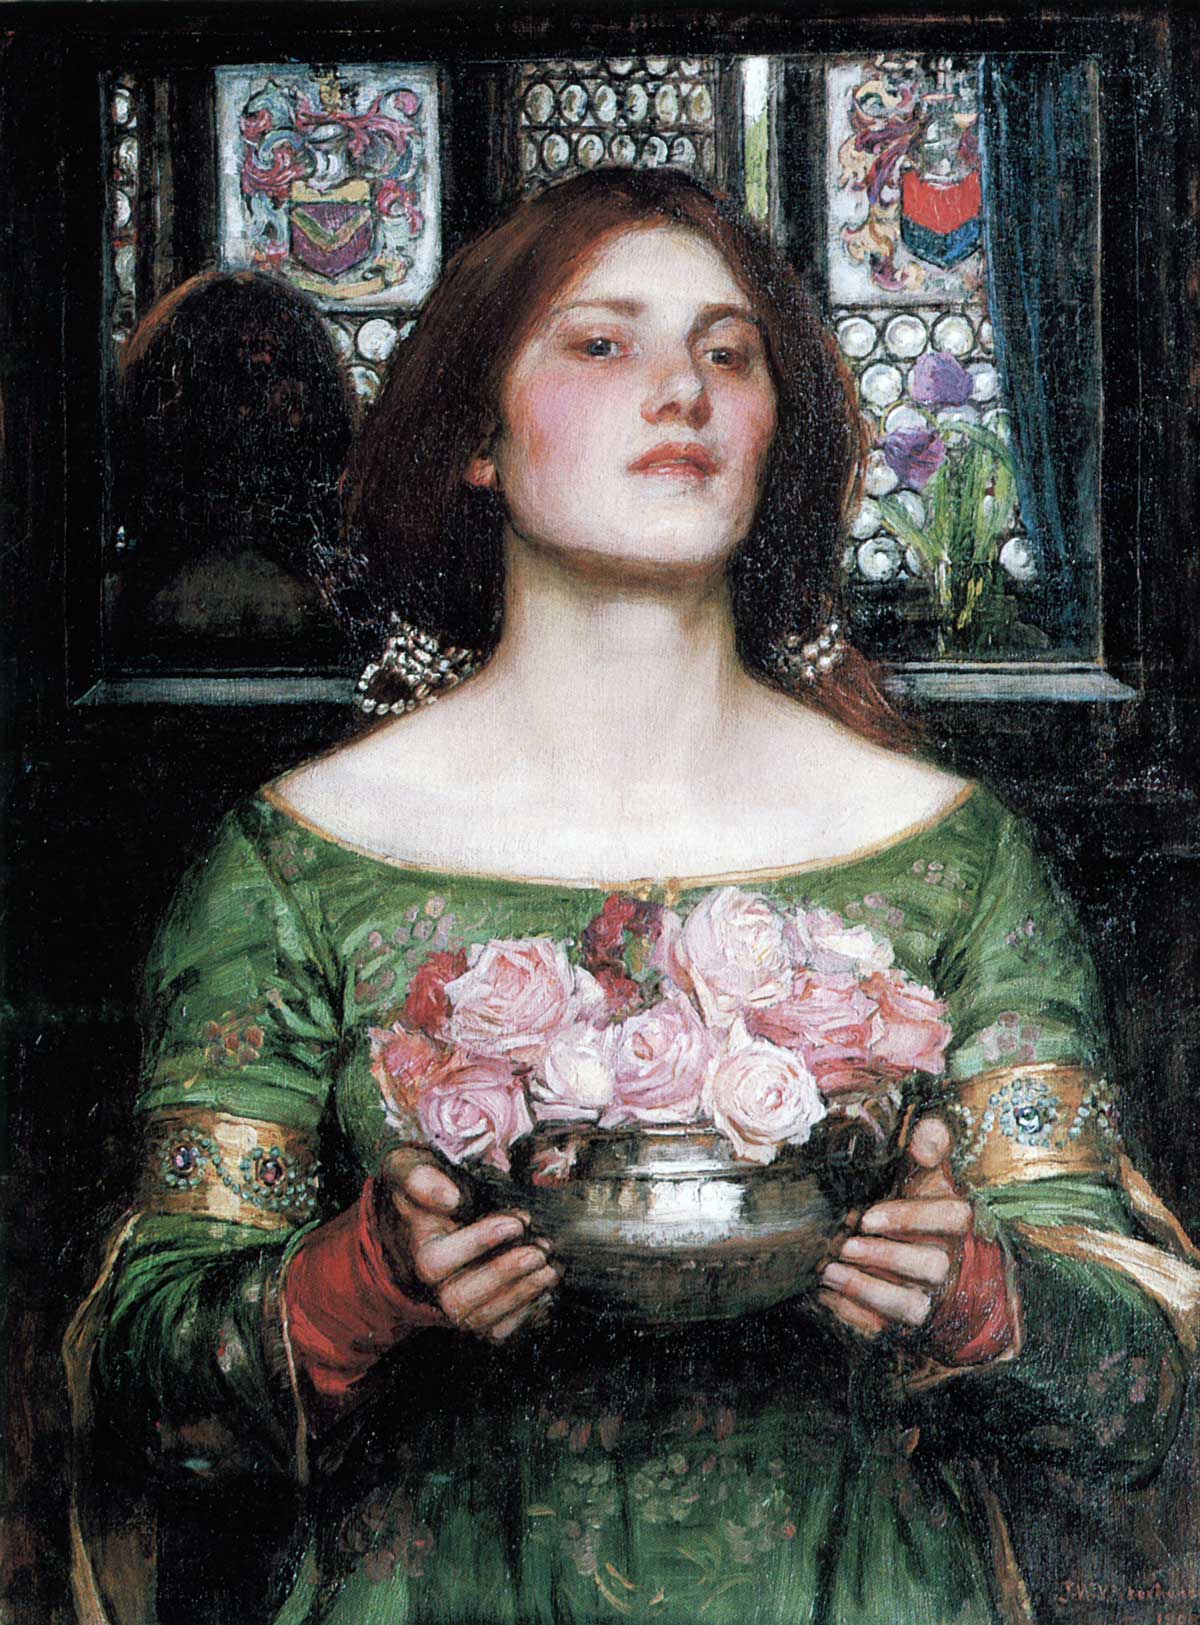 Gather ye rosebuds old masters painting of woman with bowl of roses.